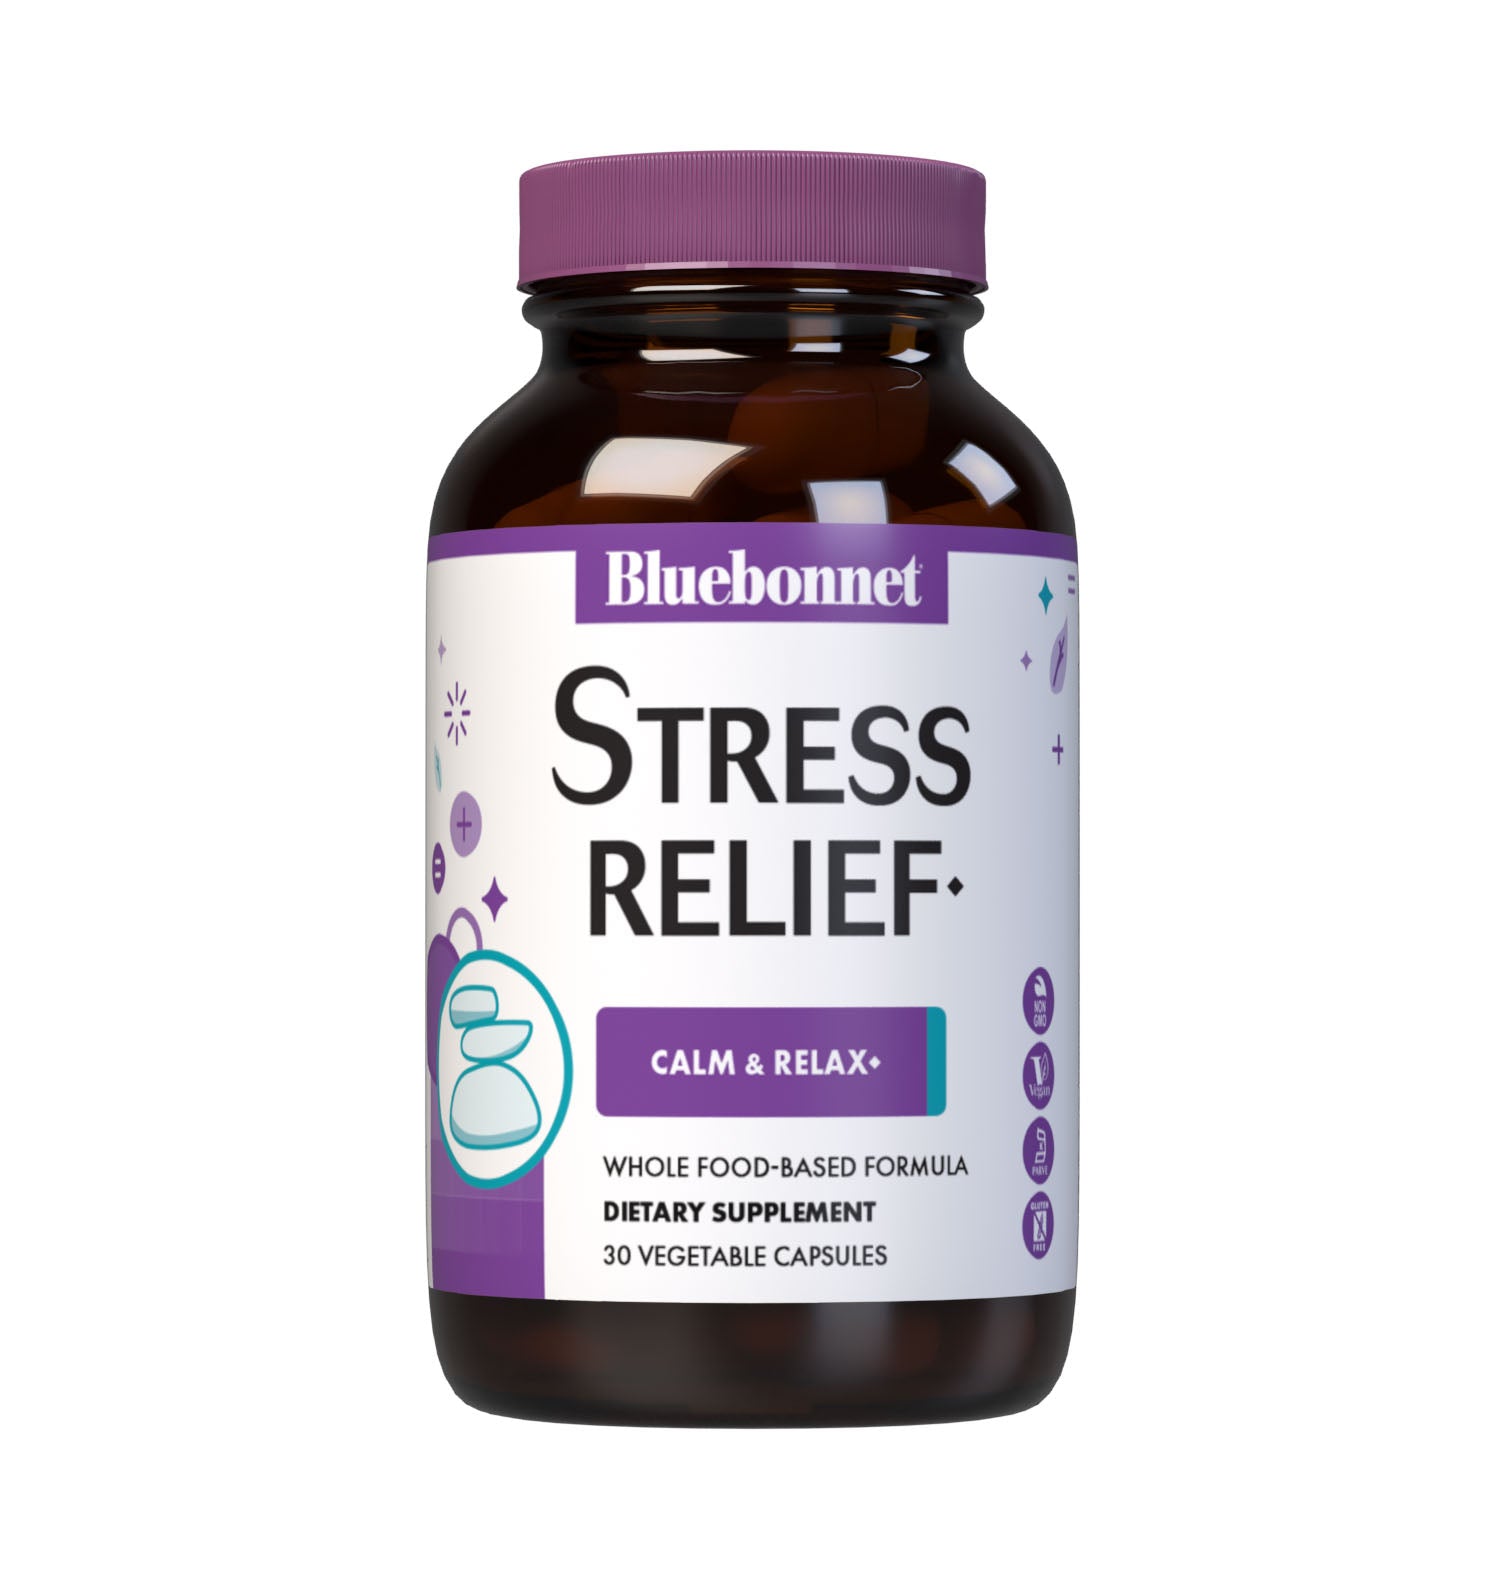 Bluebonnet’s Targeted Choice Stress Relief 30 Vegetable Capsules are specially formulated with a unique blend of sustainably harvested or wildcrafted herbal extracts, along with the amino acid derivative, L-theanine, to help the body and mind adapt and cope with occasional stressors while promoting an overall sense of relaxation. #size_30 count